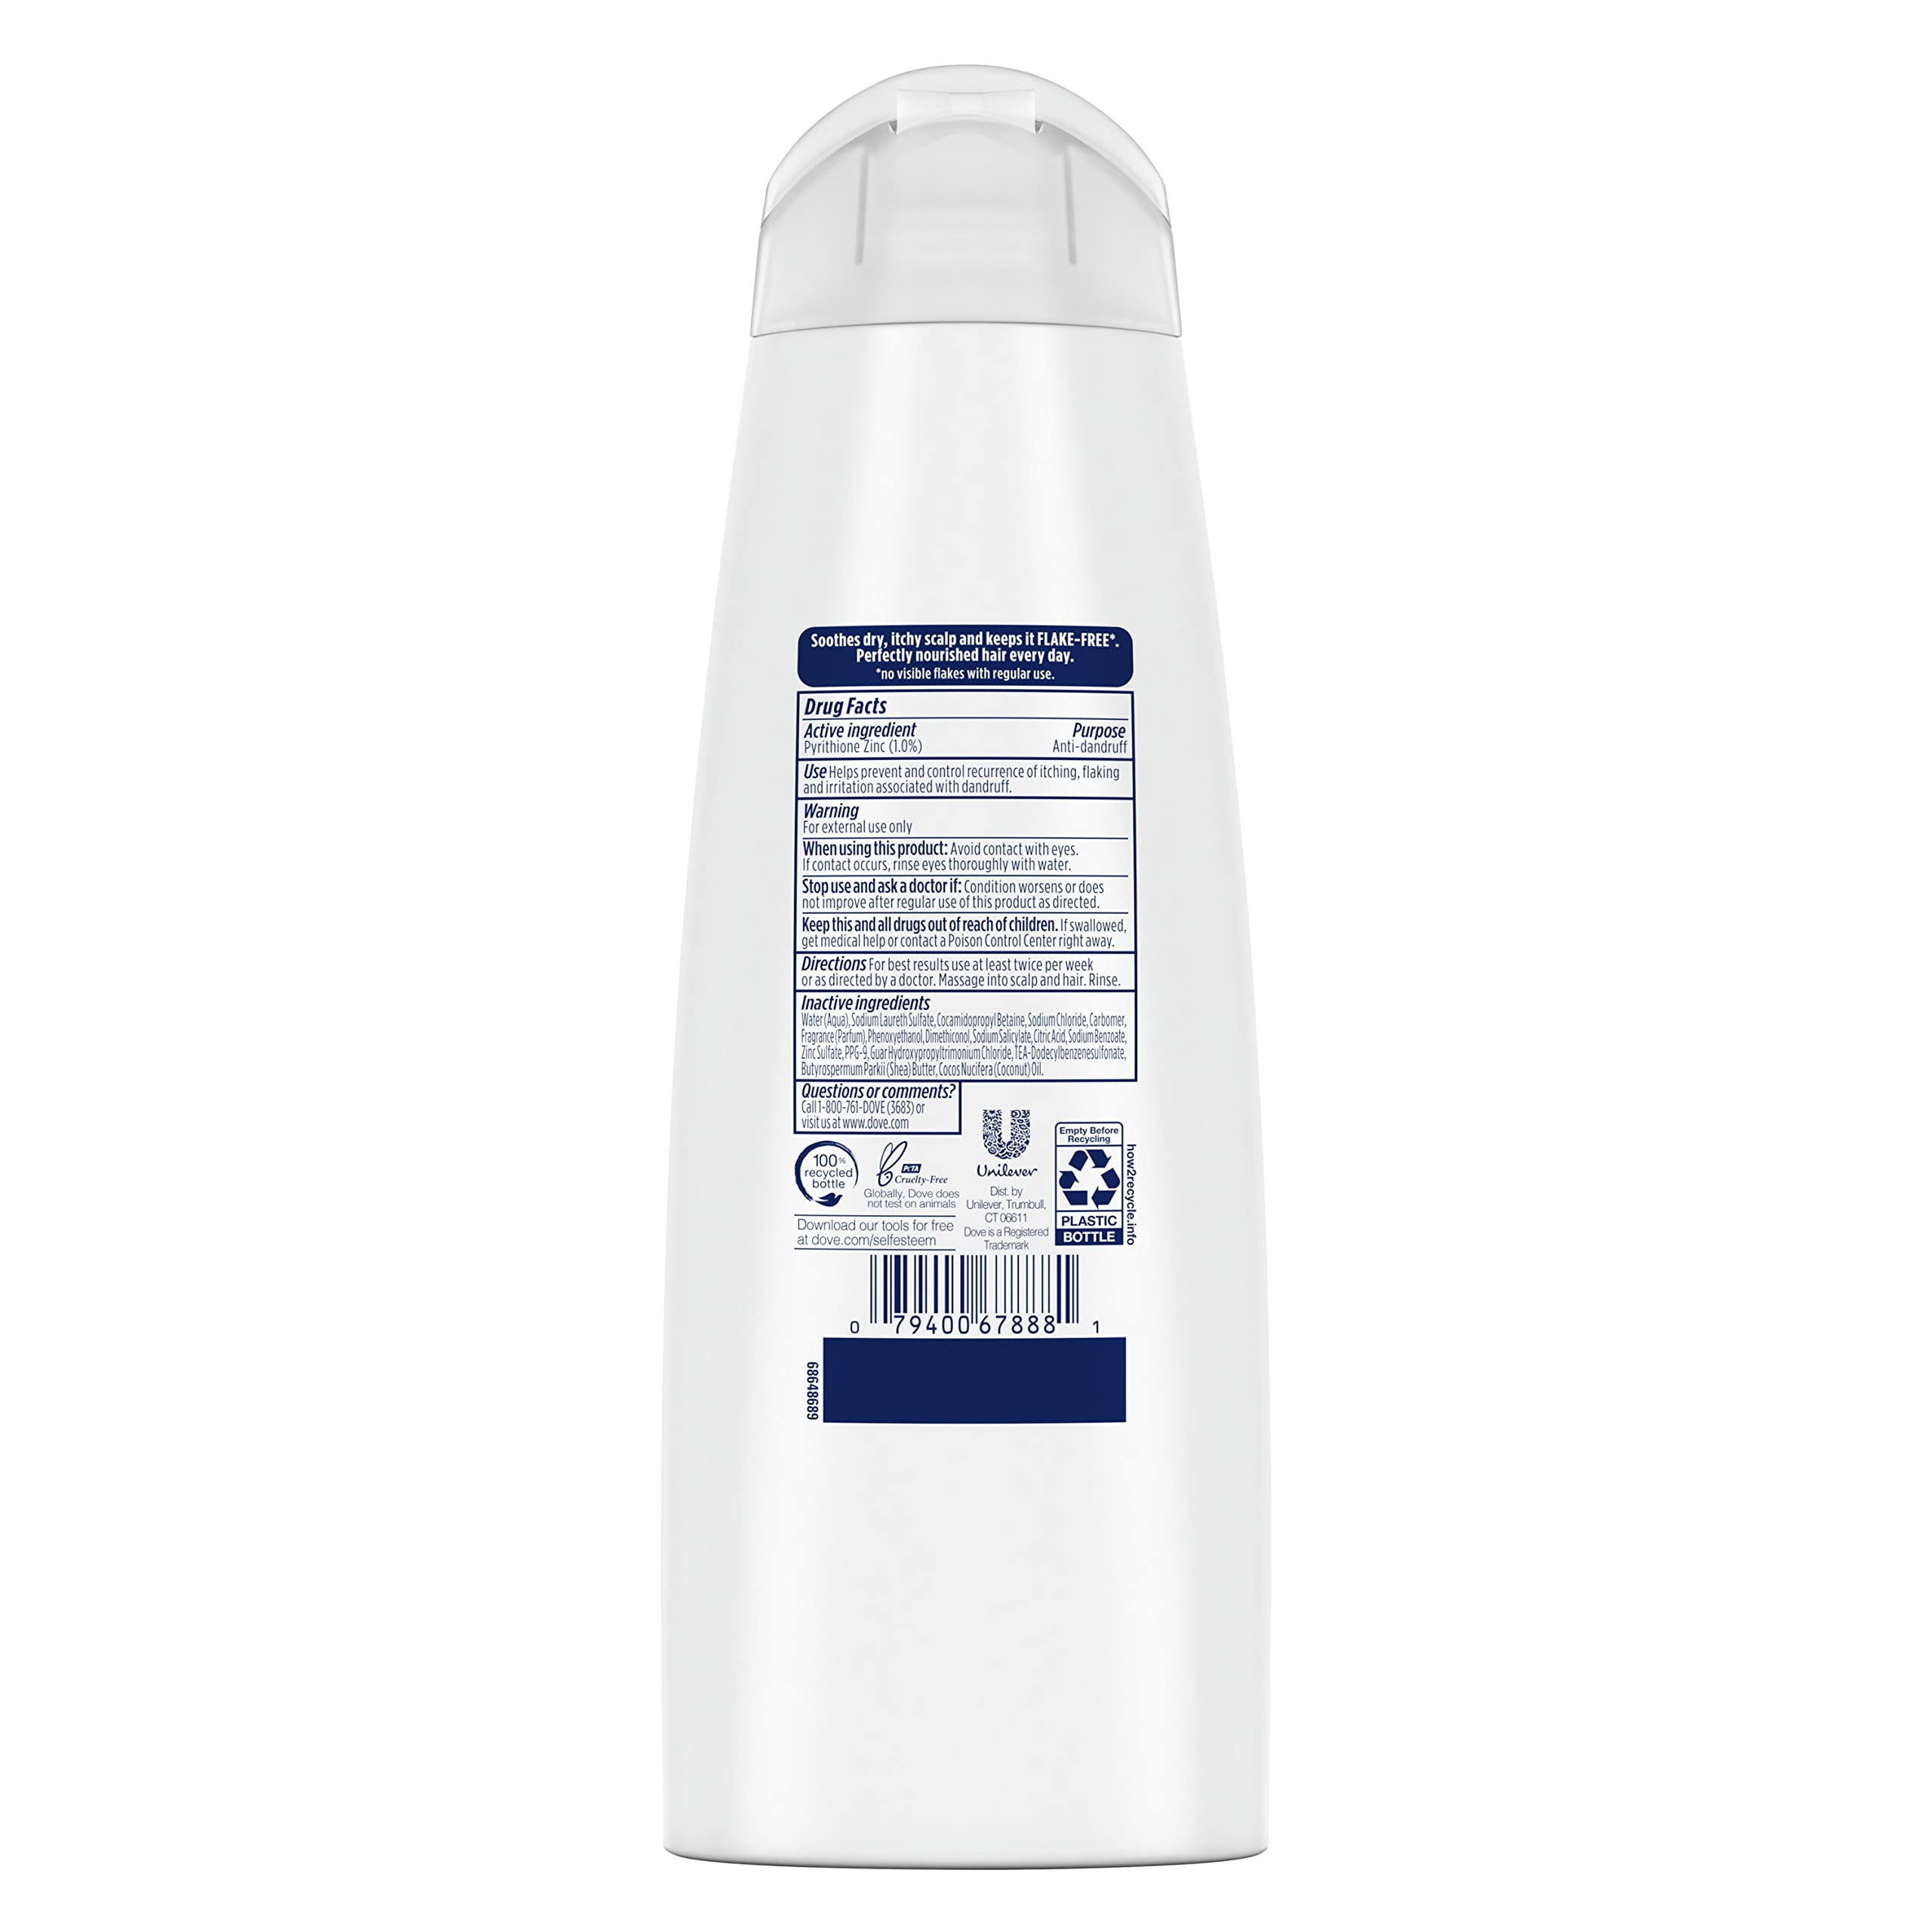 Dove DermaCare Anti Dandruff Shampoo for Dry, Itchy Scalp Dryness and Itch Relief Dry Scalp Treatment with Pyrithione Zinc 12 oz